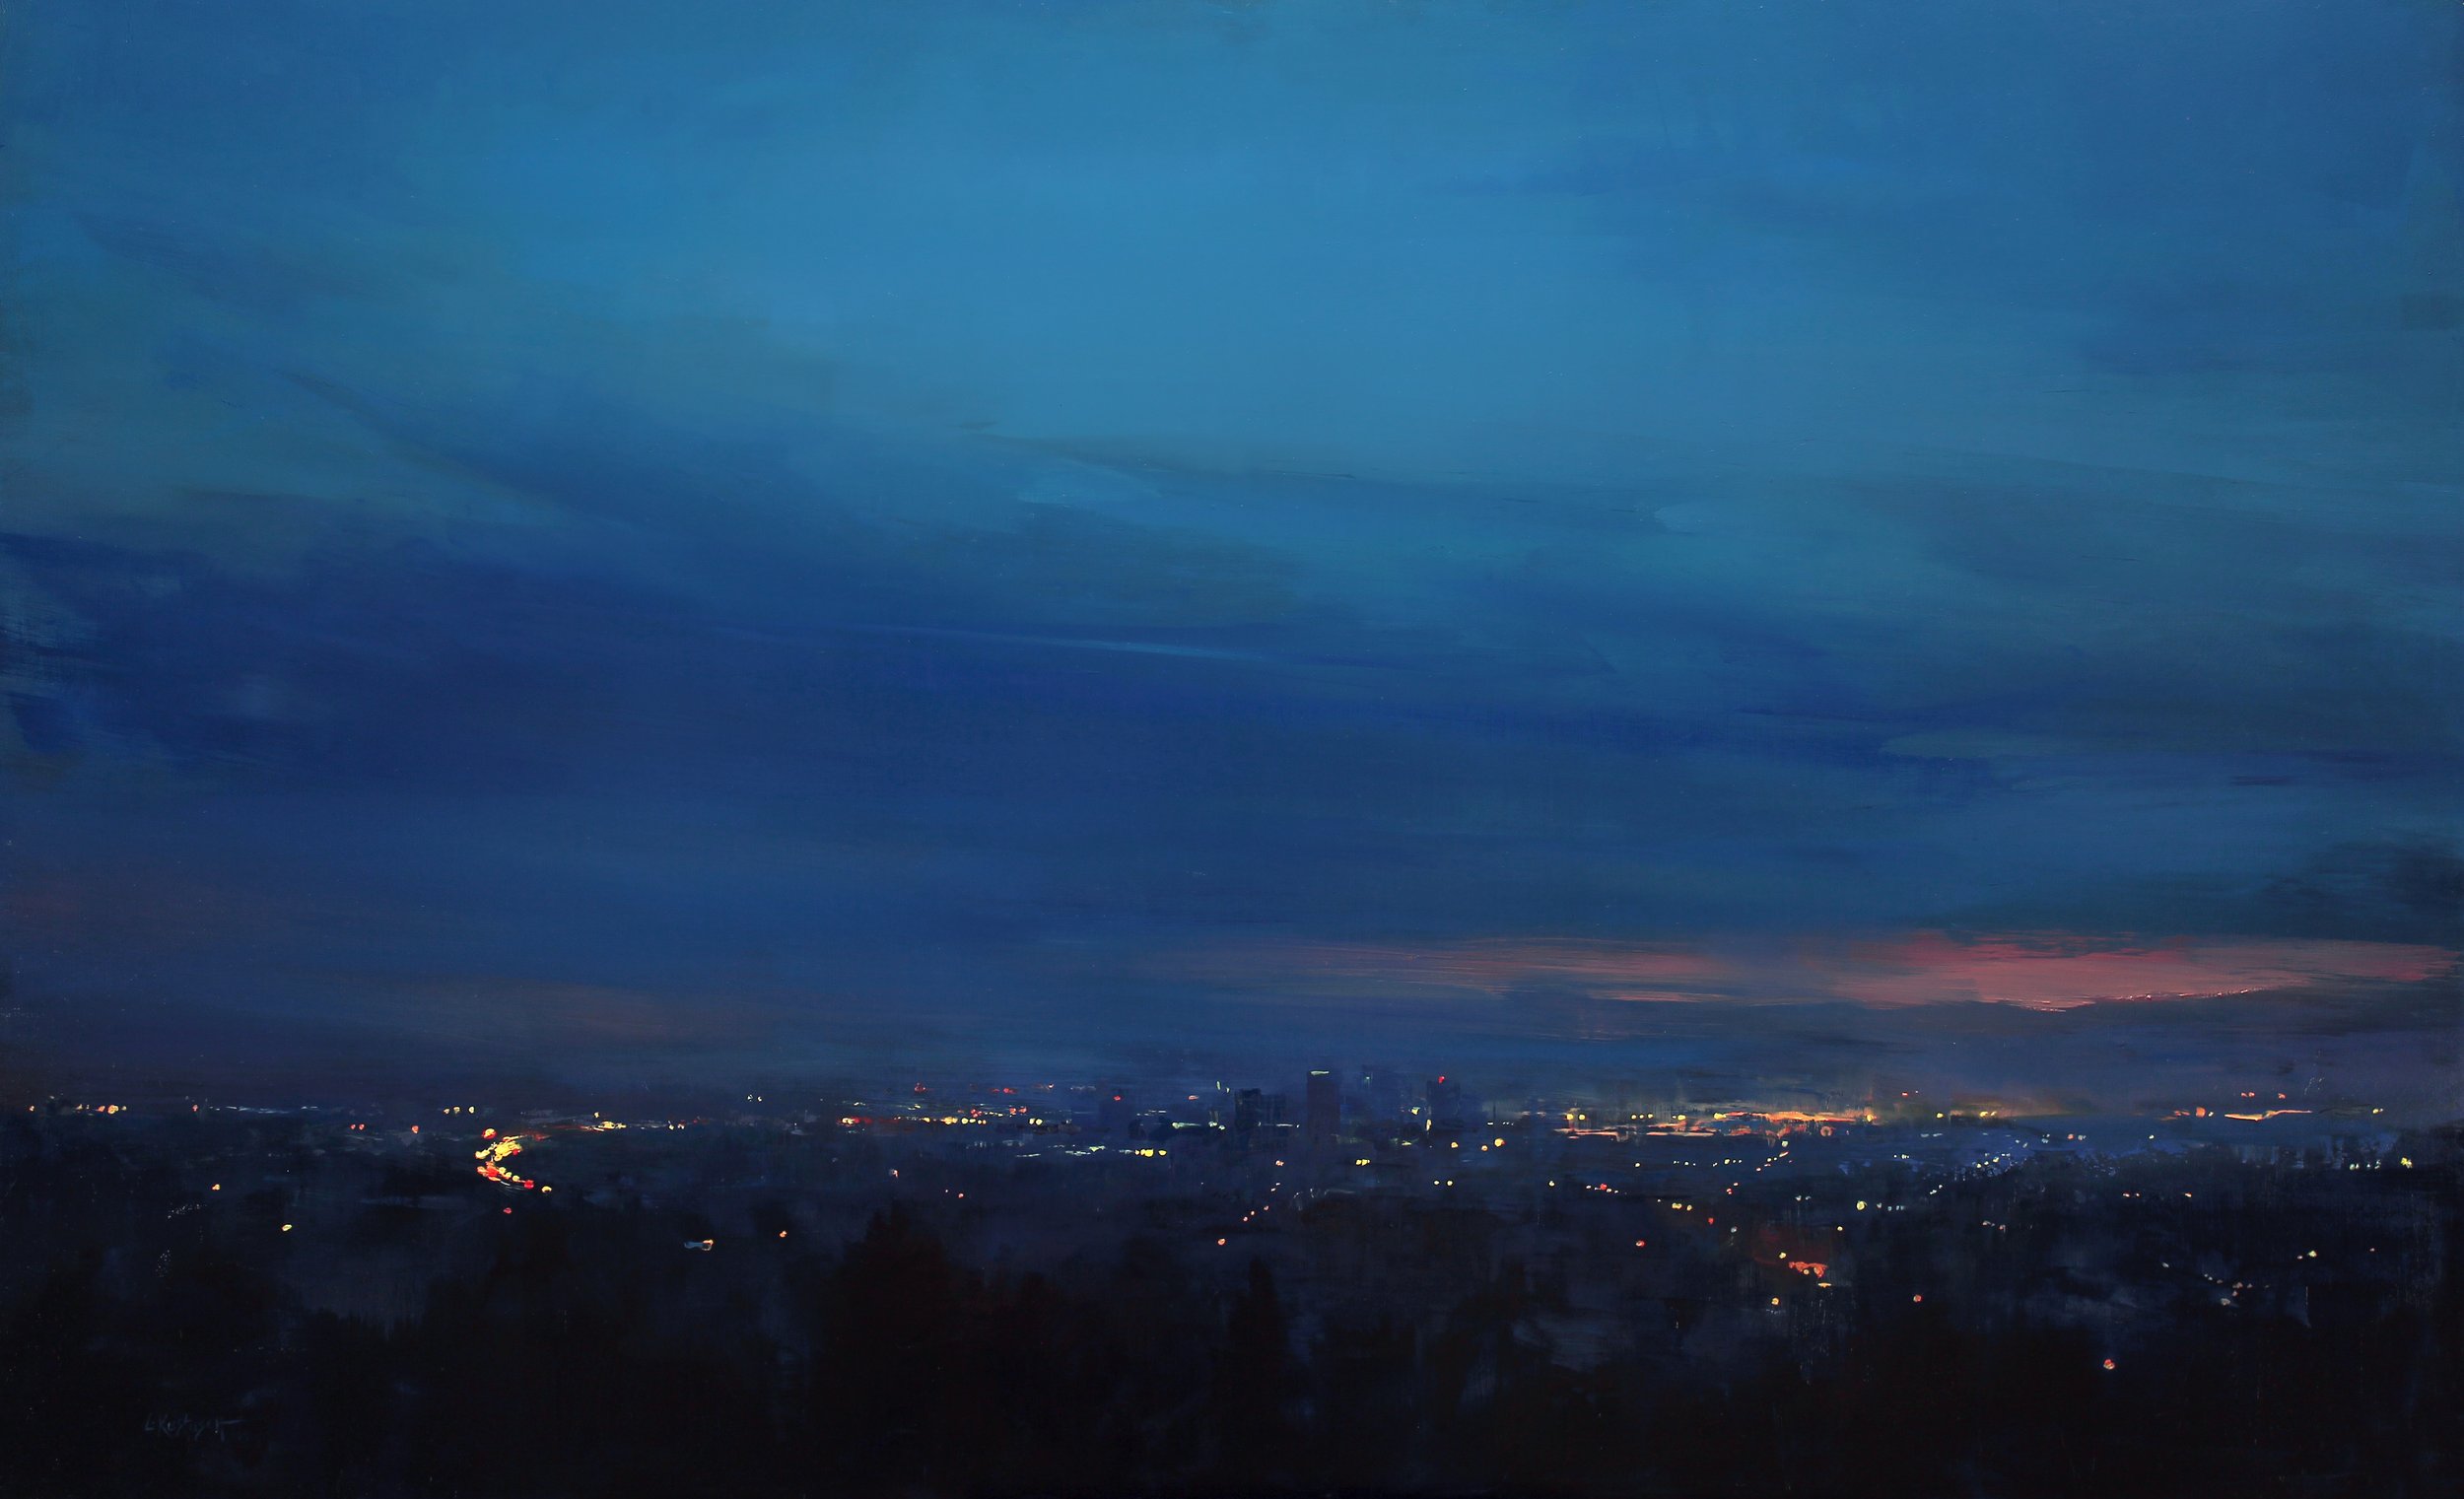 Night Falls over the City by Lindsey Kustusch